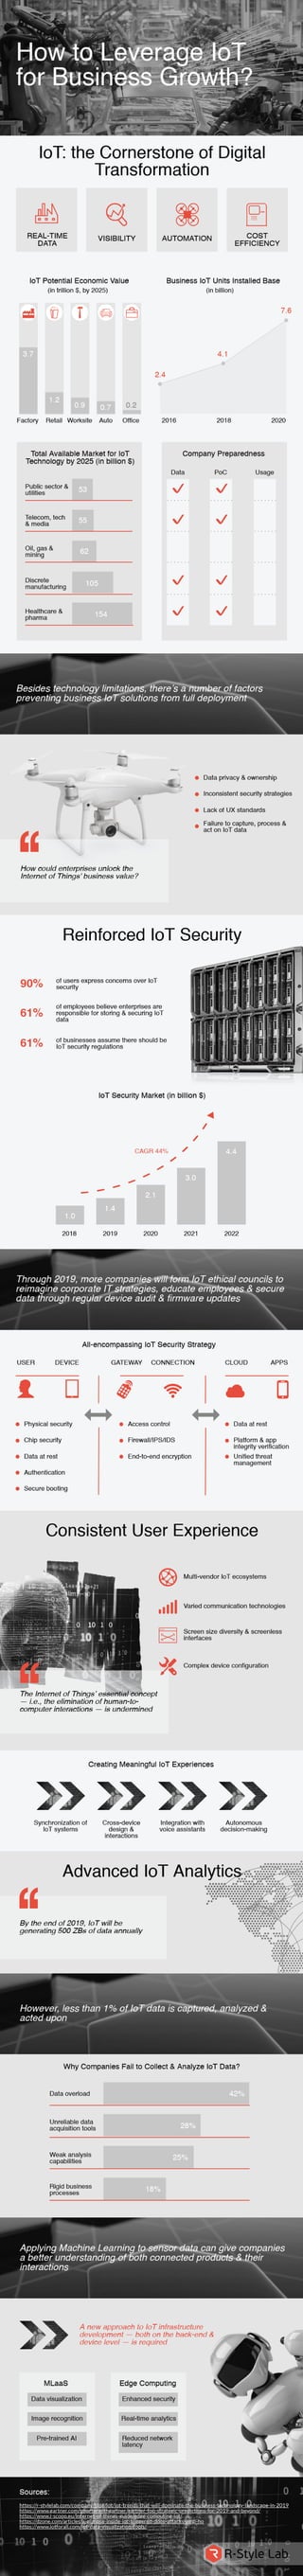 How to Leverage IoT for Business Growth: Infographic